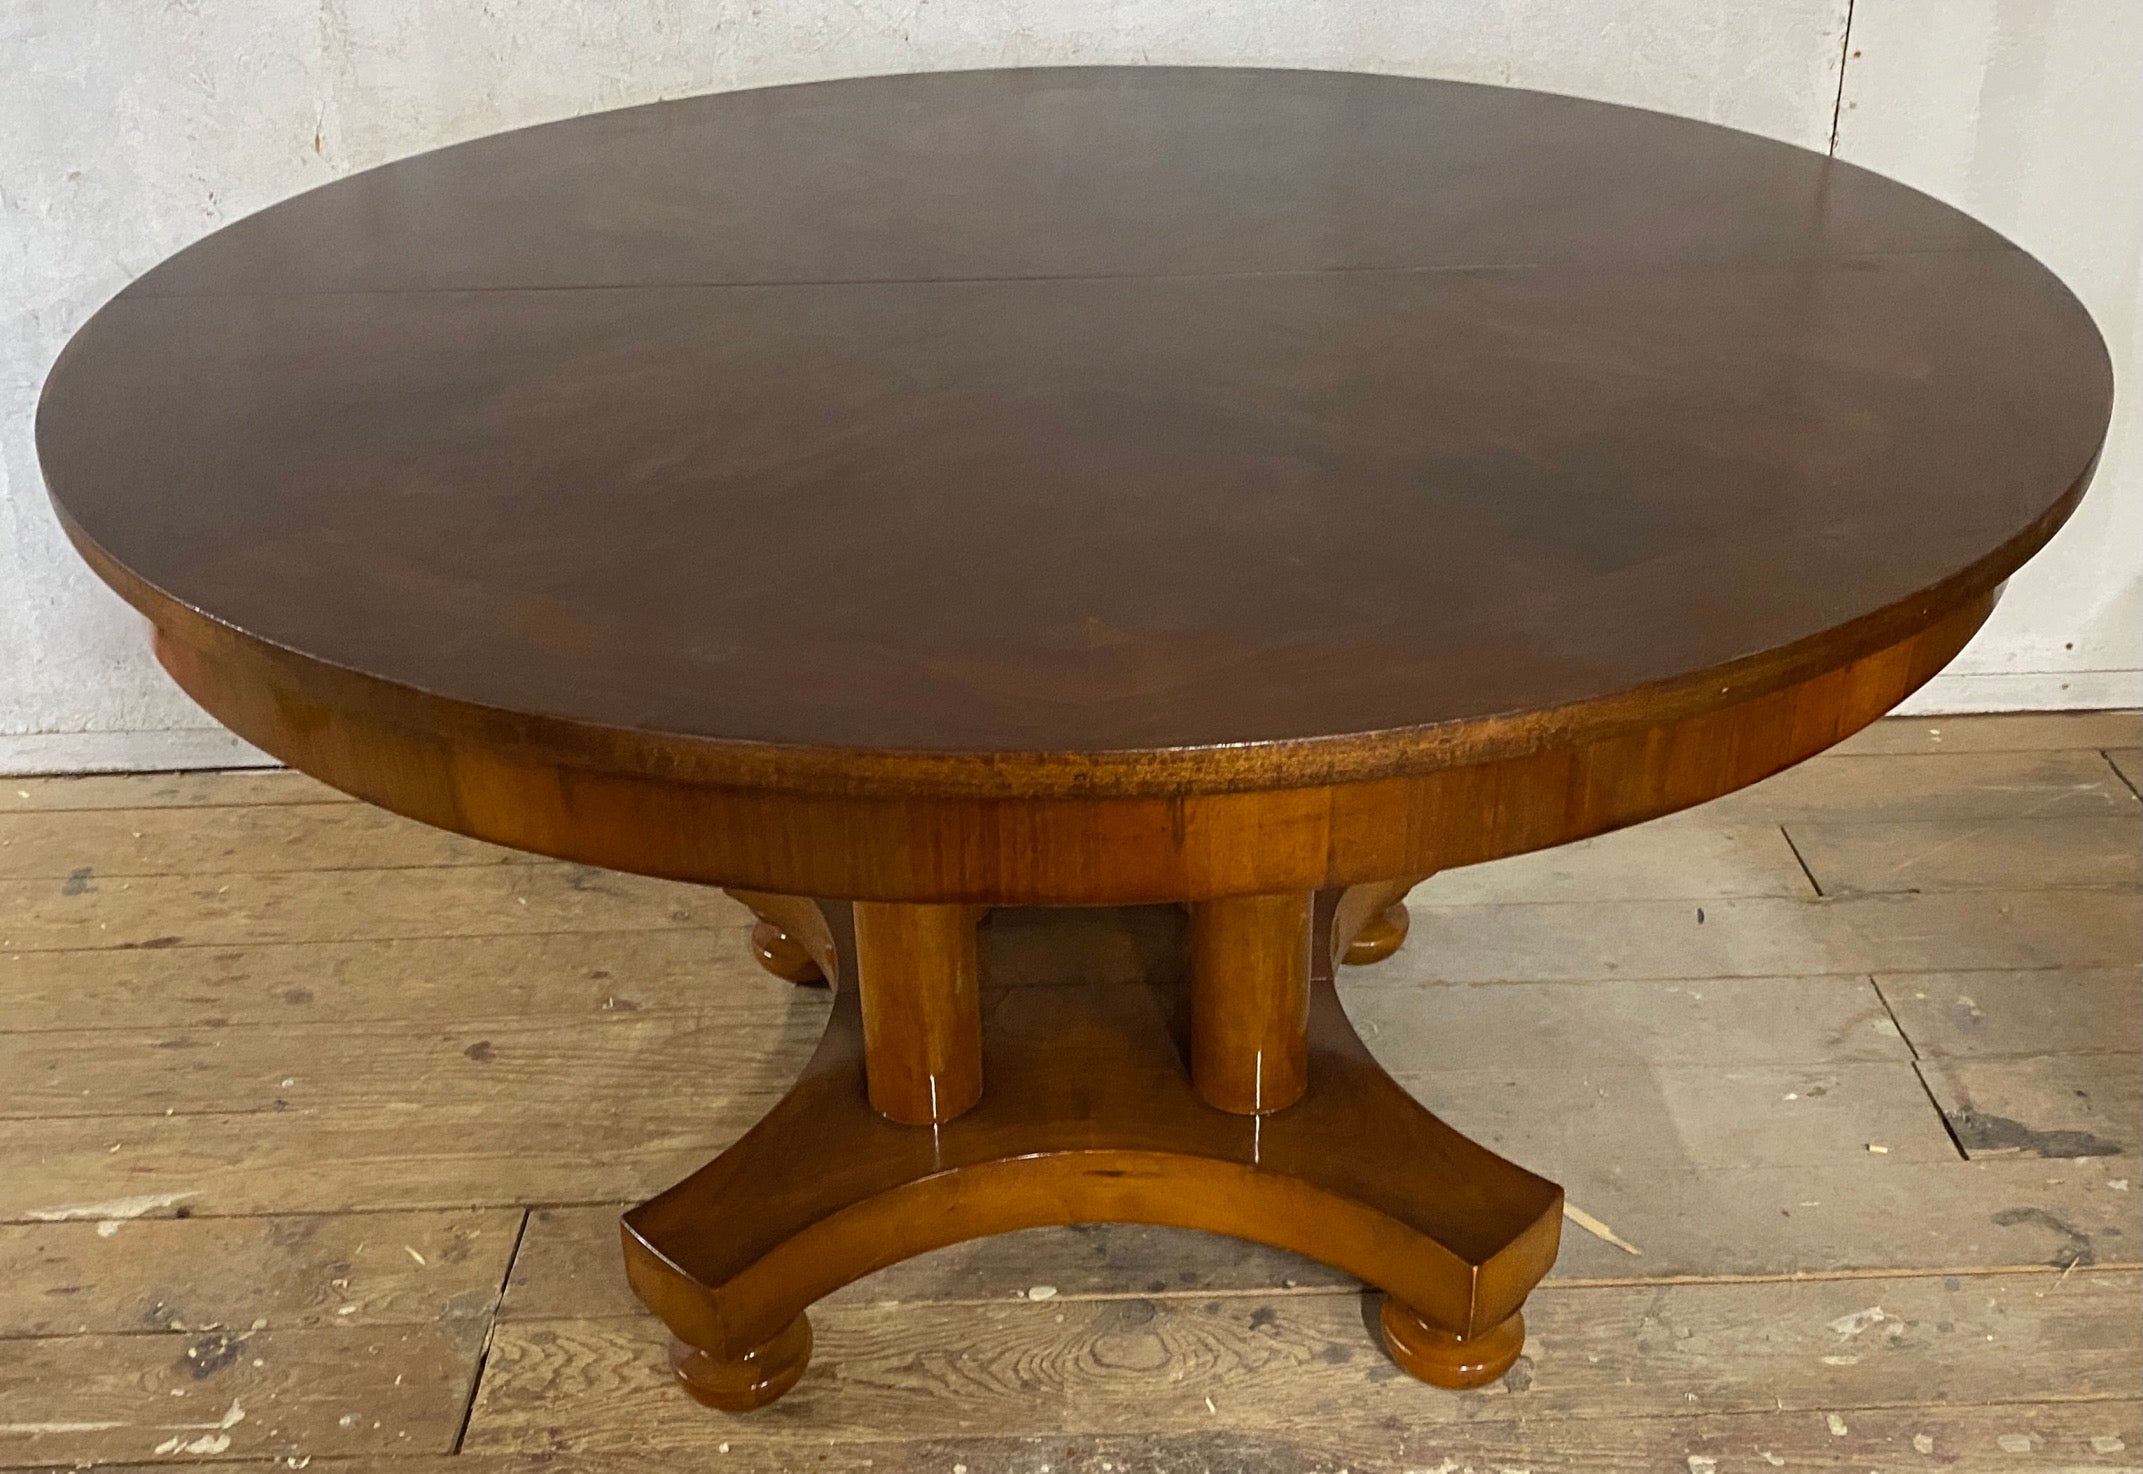 A handsome round Regency style center pedestal dining table.
The base has four pillar legs attached to a center platform and round ball feet. The table has been newly restored. Although it can be opened and extended, it does not have any